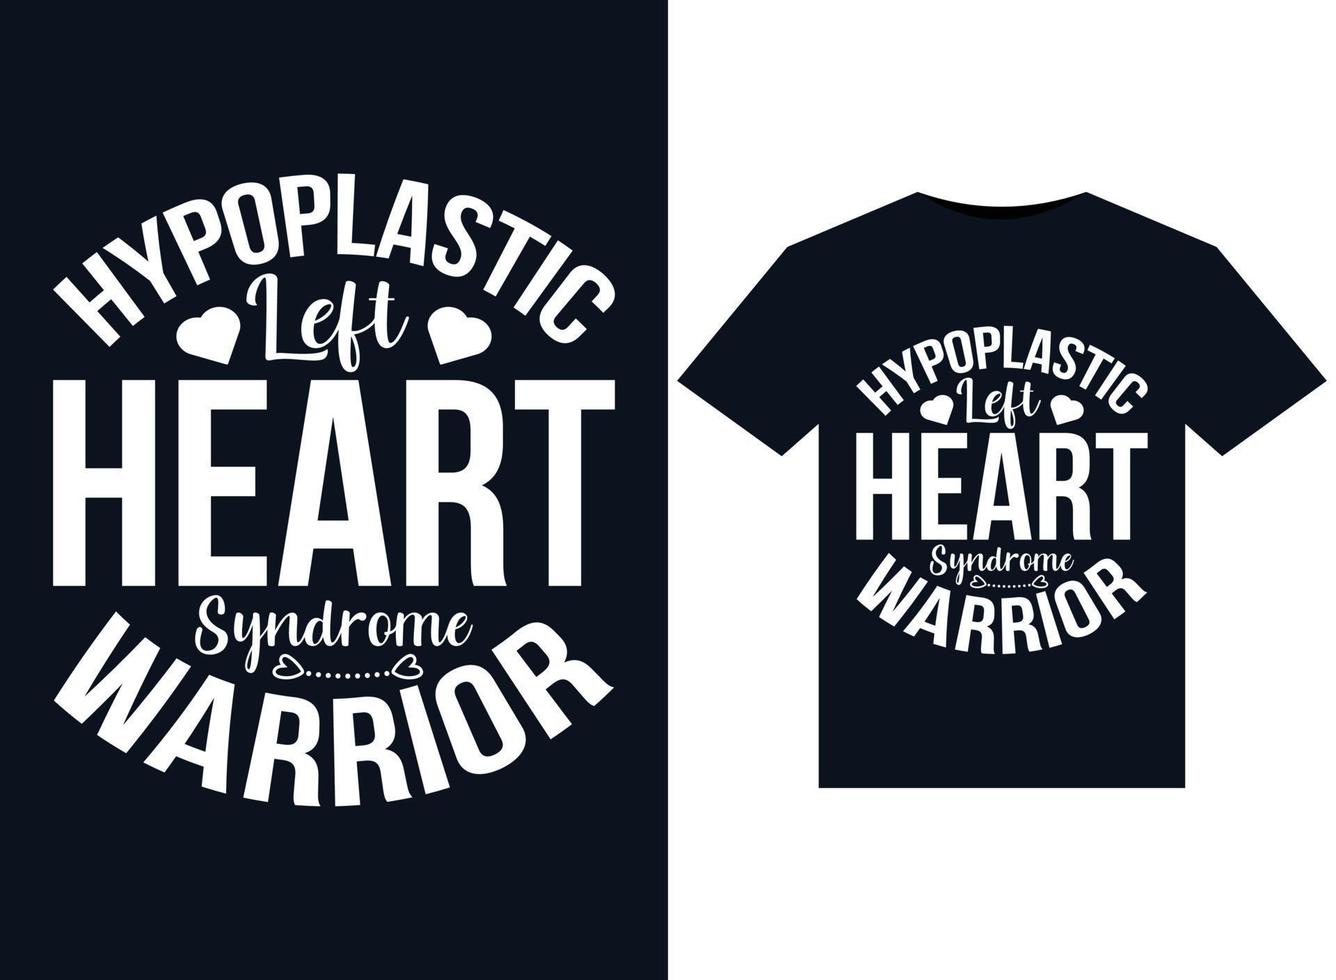 Hypoplastic Left Heart Syndrome Warrior illustrations for print-ready T-Shirts design vector